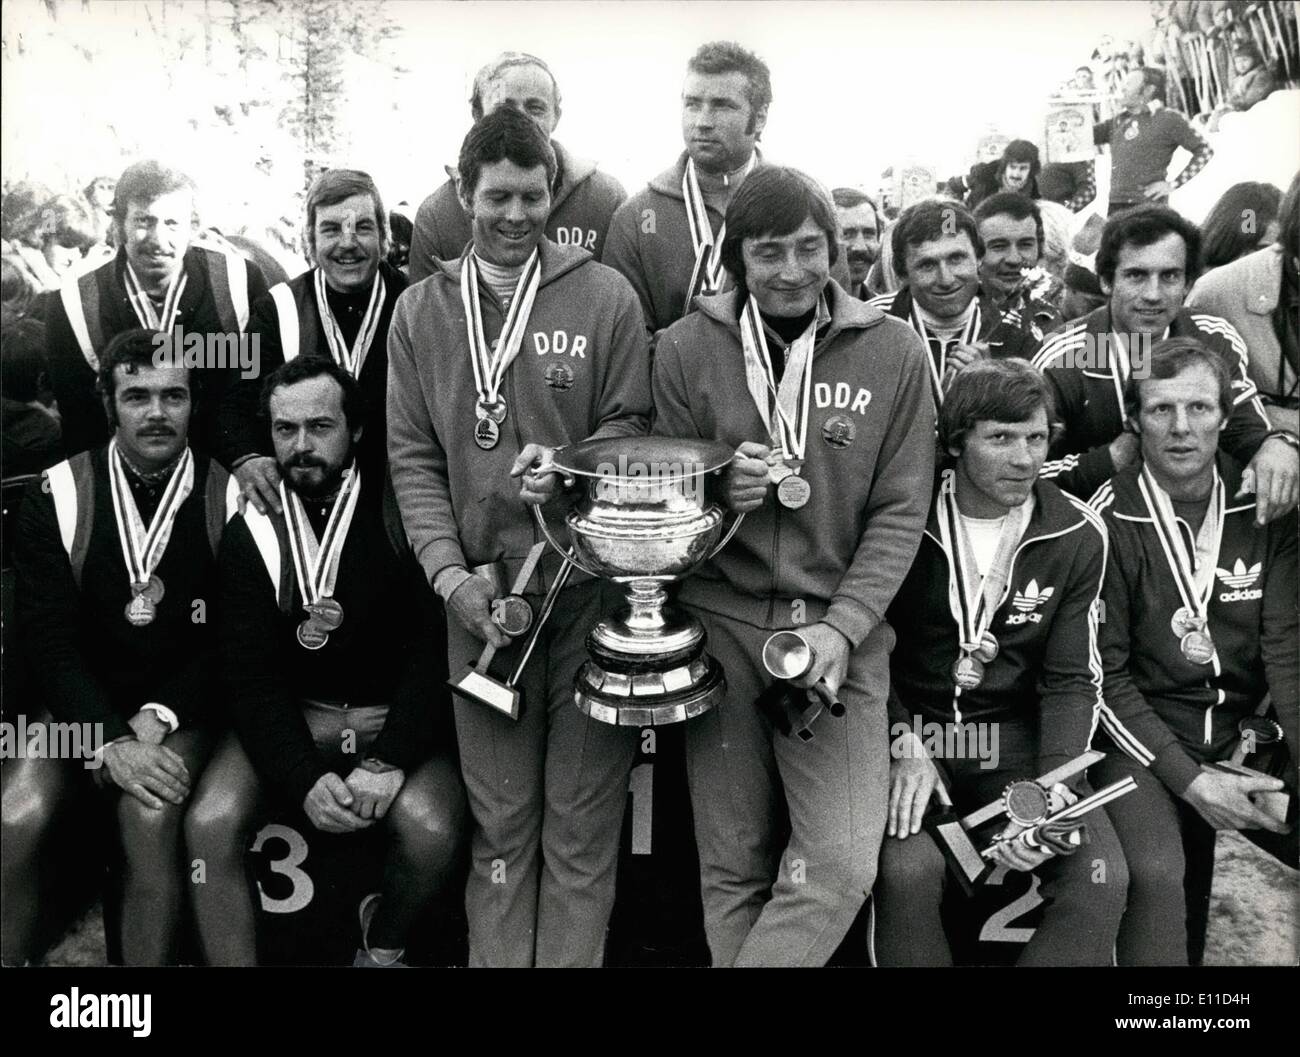 Feb. 02, 1977 - Gold, silver and bronze for bob champions: World championship in four men bob. Picture shows medal winners, on left 3rd placed west Germans with Resch, Berg, Ohlwarter and Barfuss, center Eastern Germany, winners with Nehmer, Gerhardt, Germeshausen and Bethge, at right and 2nd placed Swiss team with Schaerer, Bachli, Marti and Benz. Stock Photo